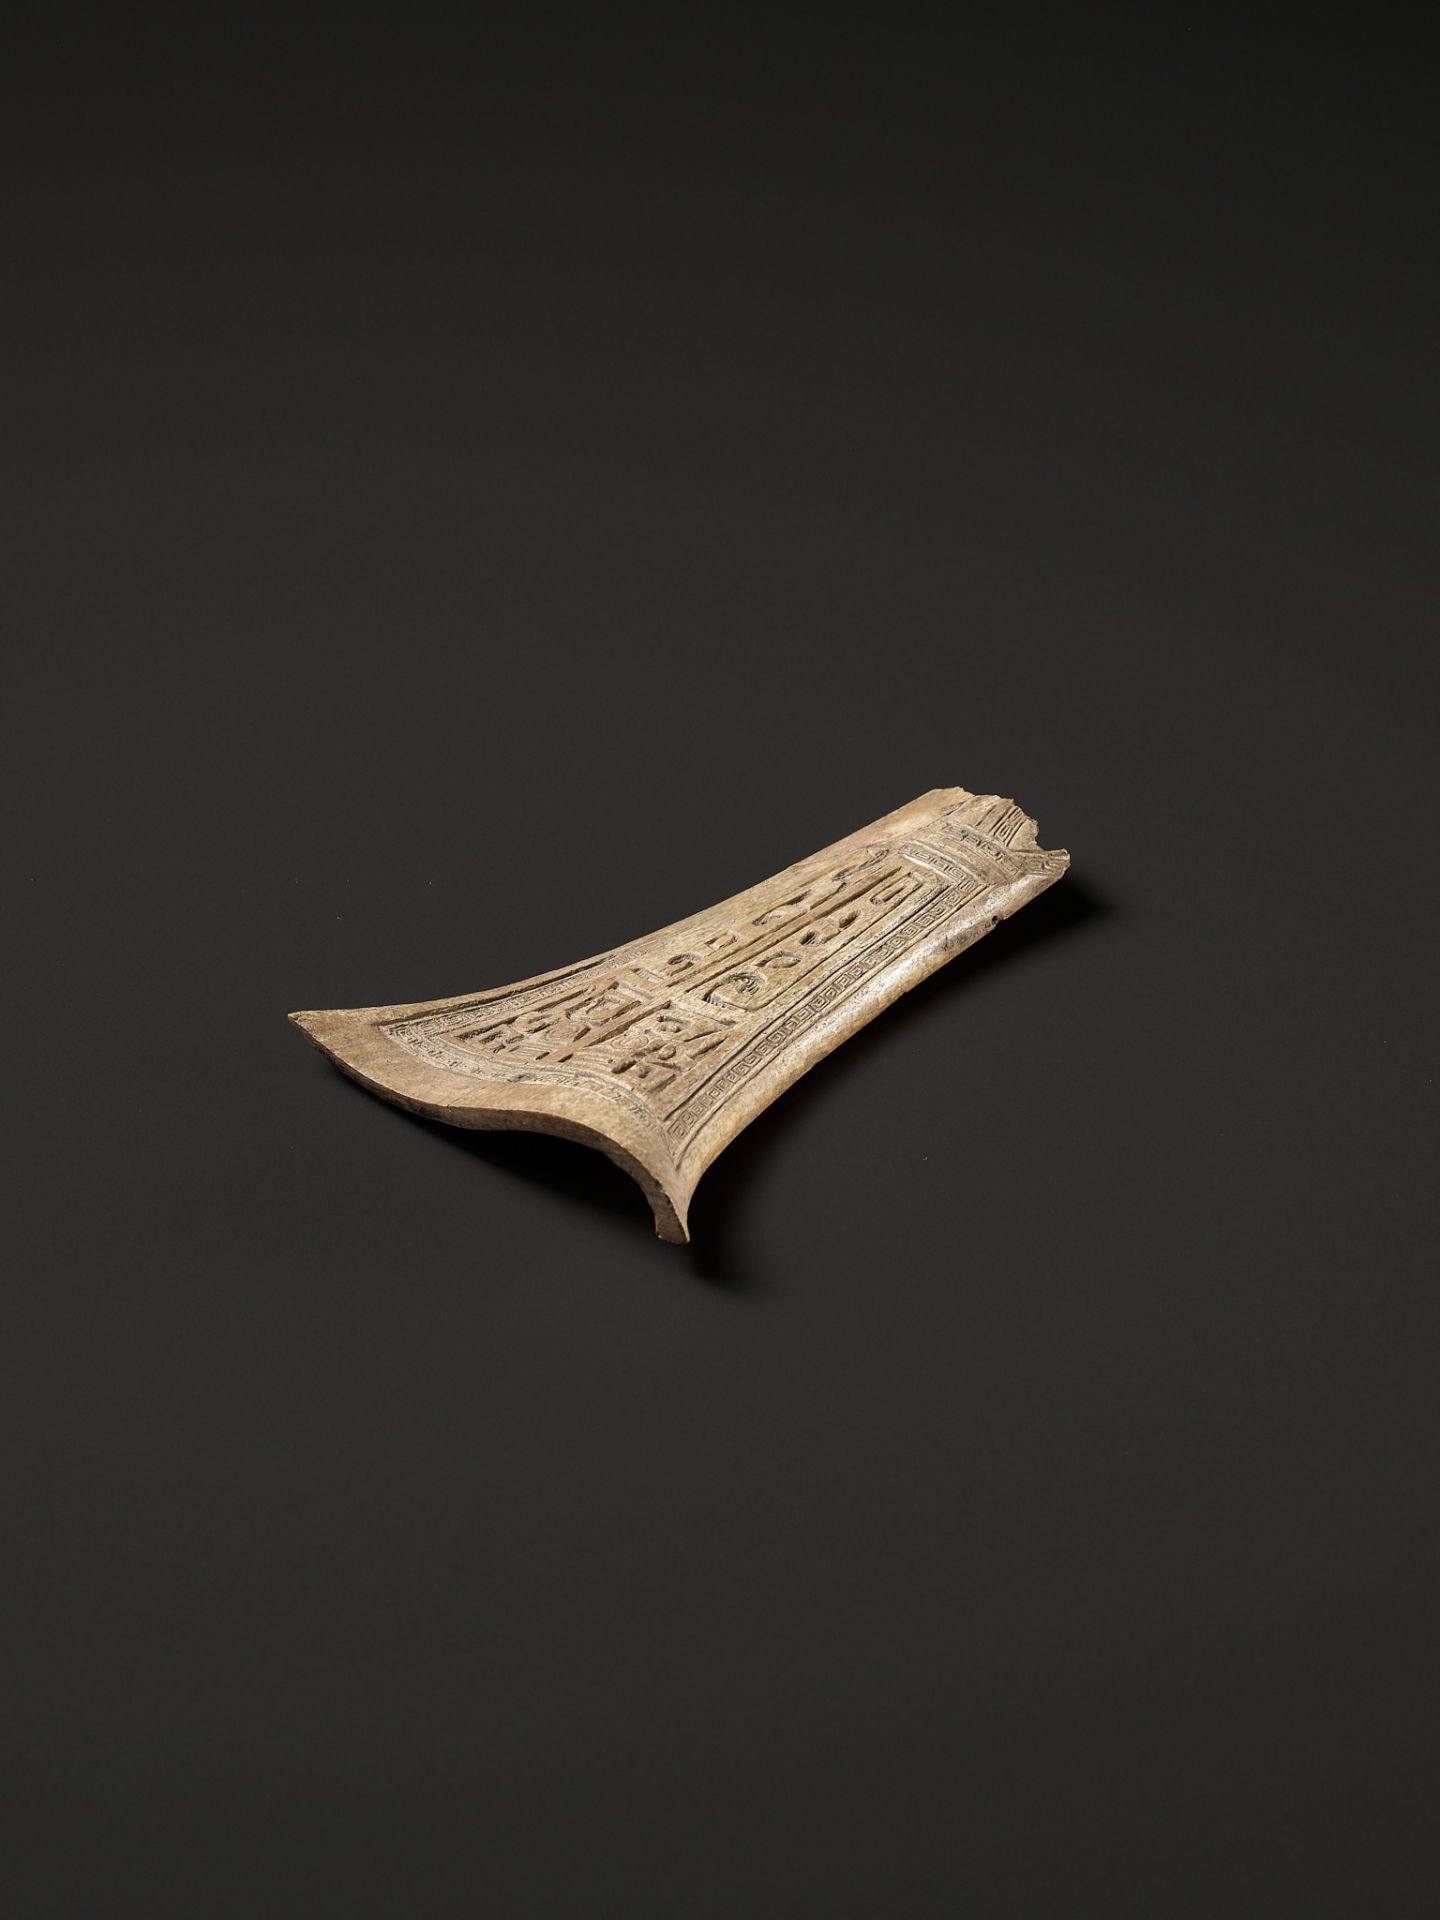 AN ARCHAIC CEREMONIAL BONE CARVING, SHANG DYNASTY - Image 2 of 17